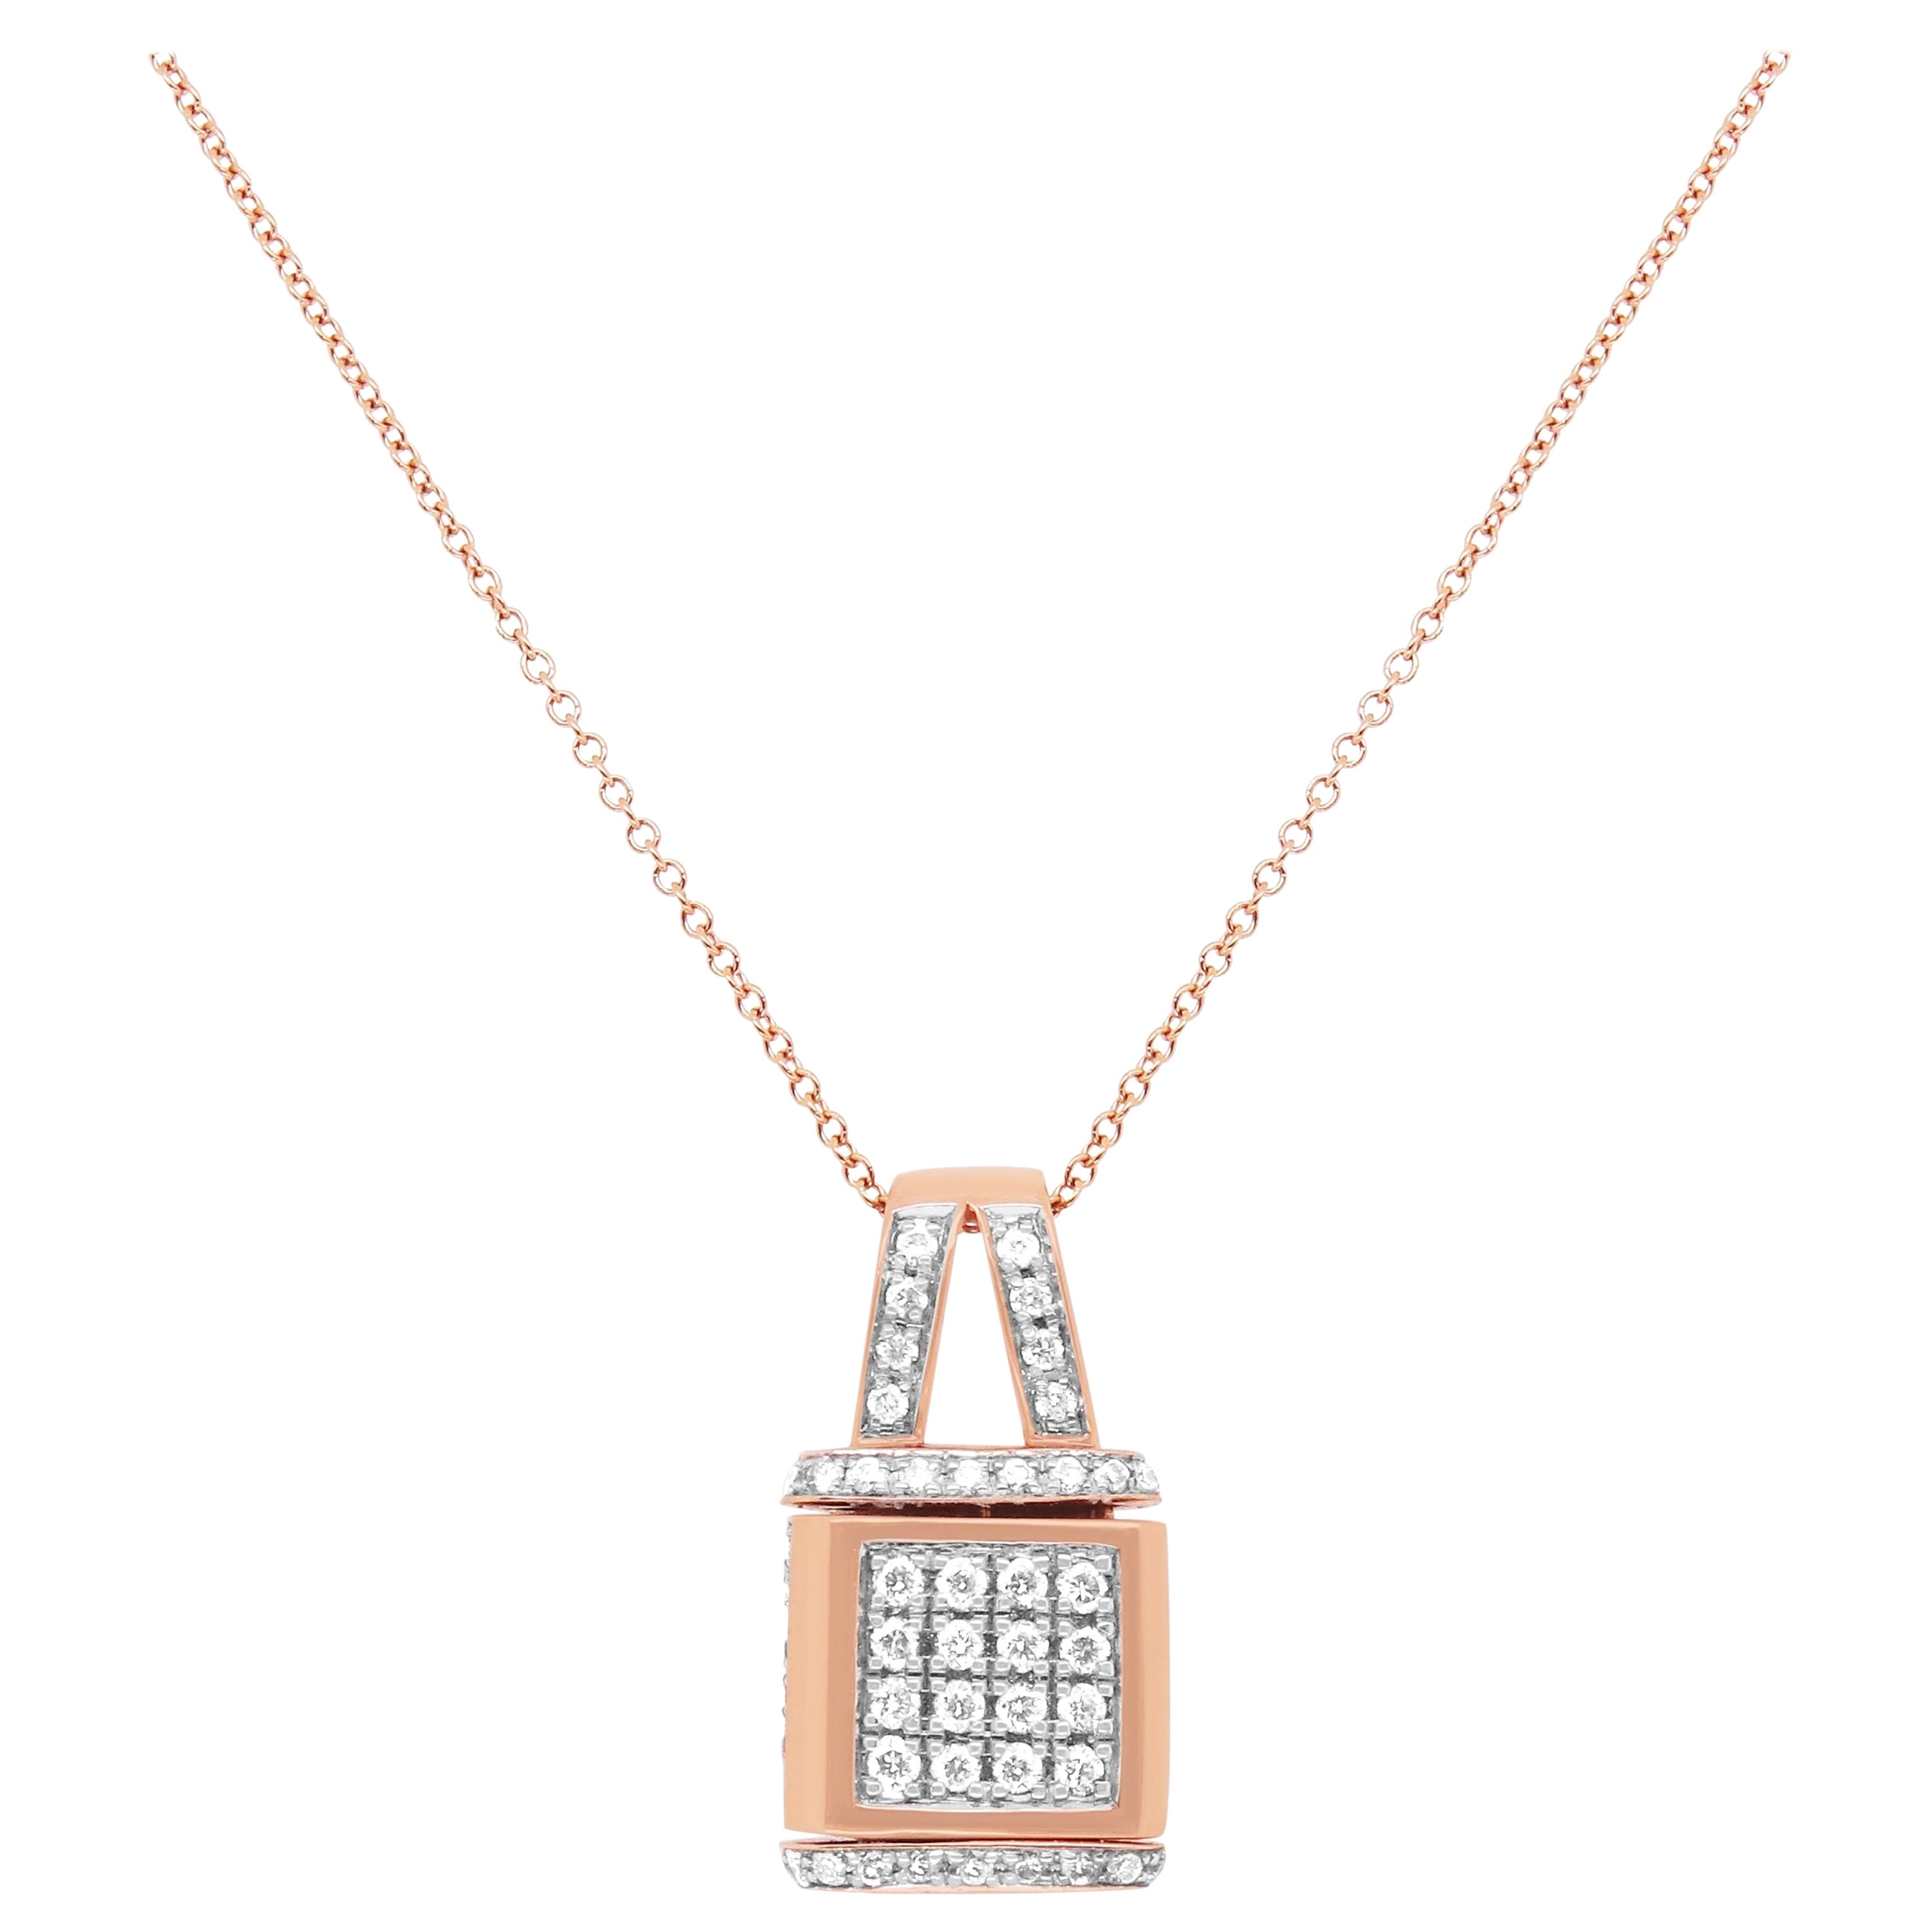 Reversible Round Cognac and White Diamond Fashion Pendant Necklace 14K Rose Gold For Sale